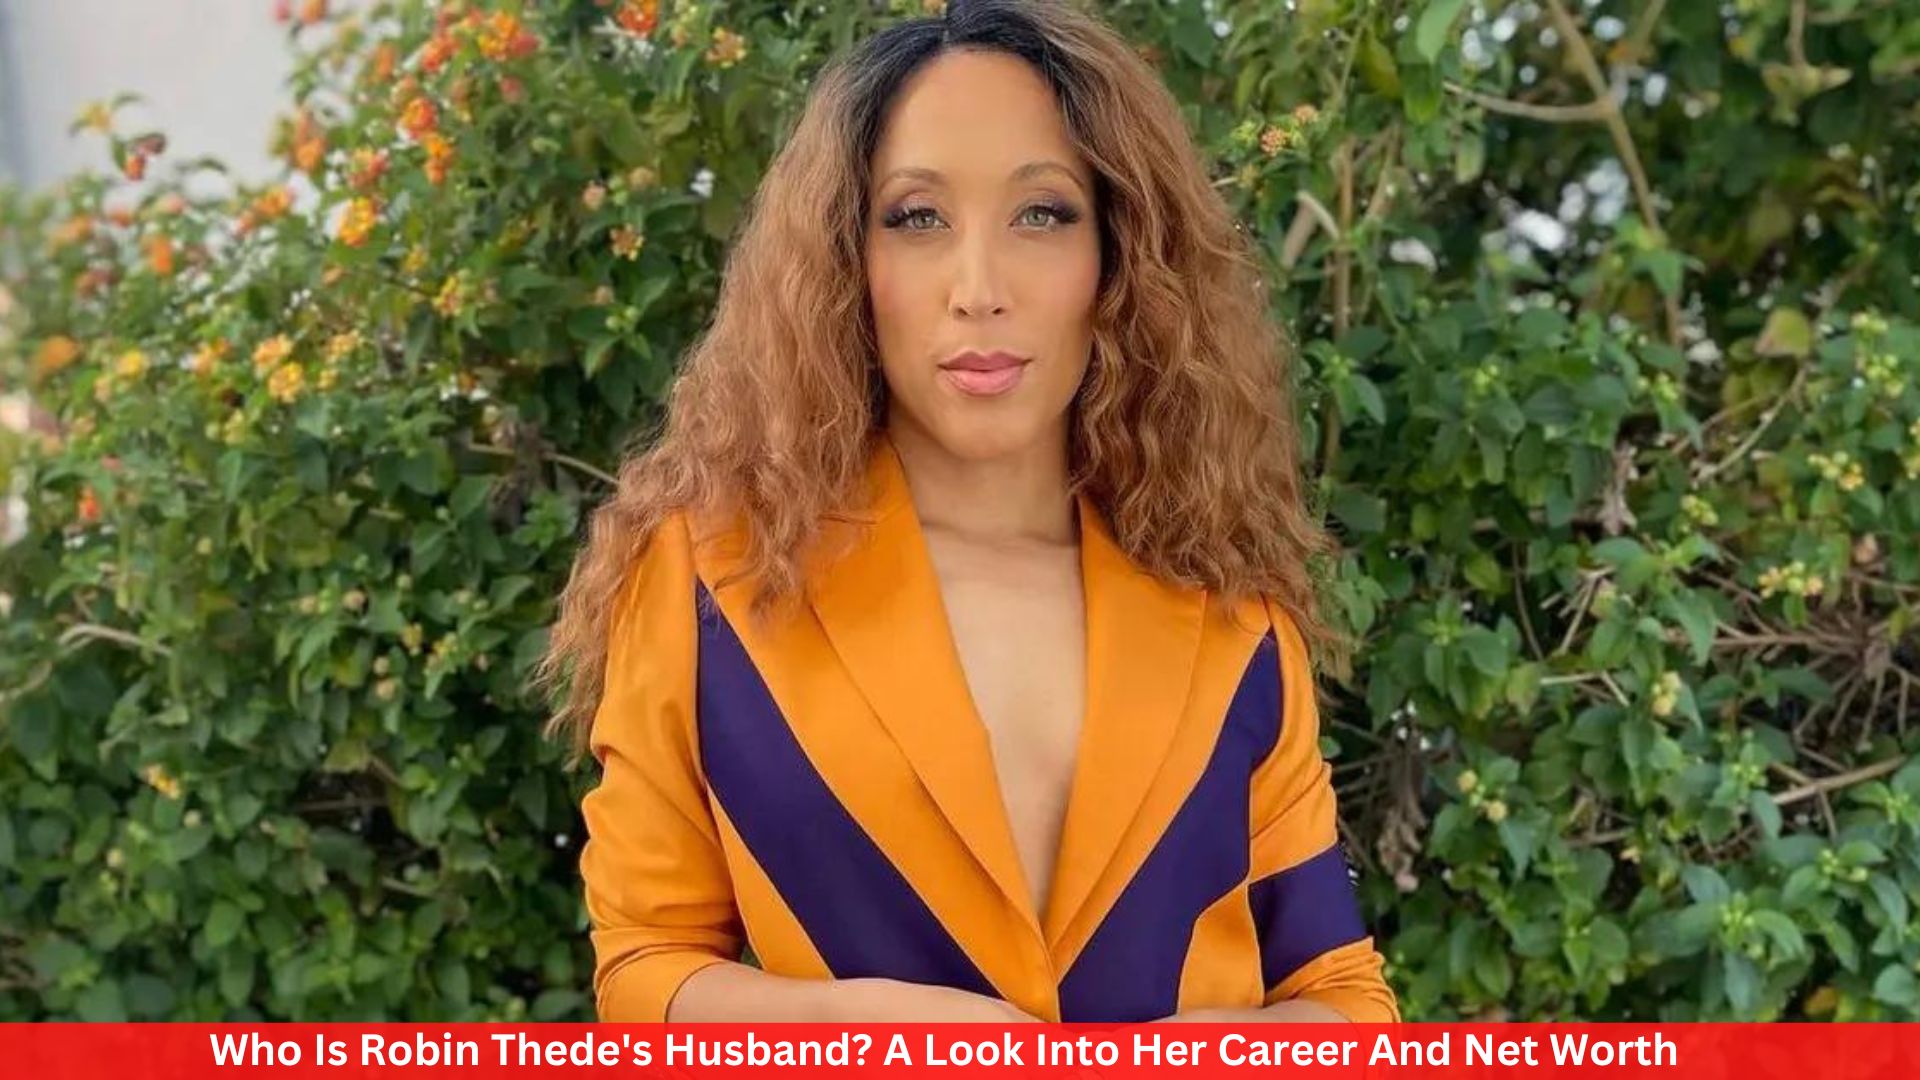 Who Is Robin Thede's Husband? A Look Into Her Career And Net Worth